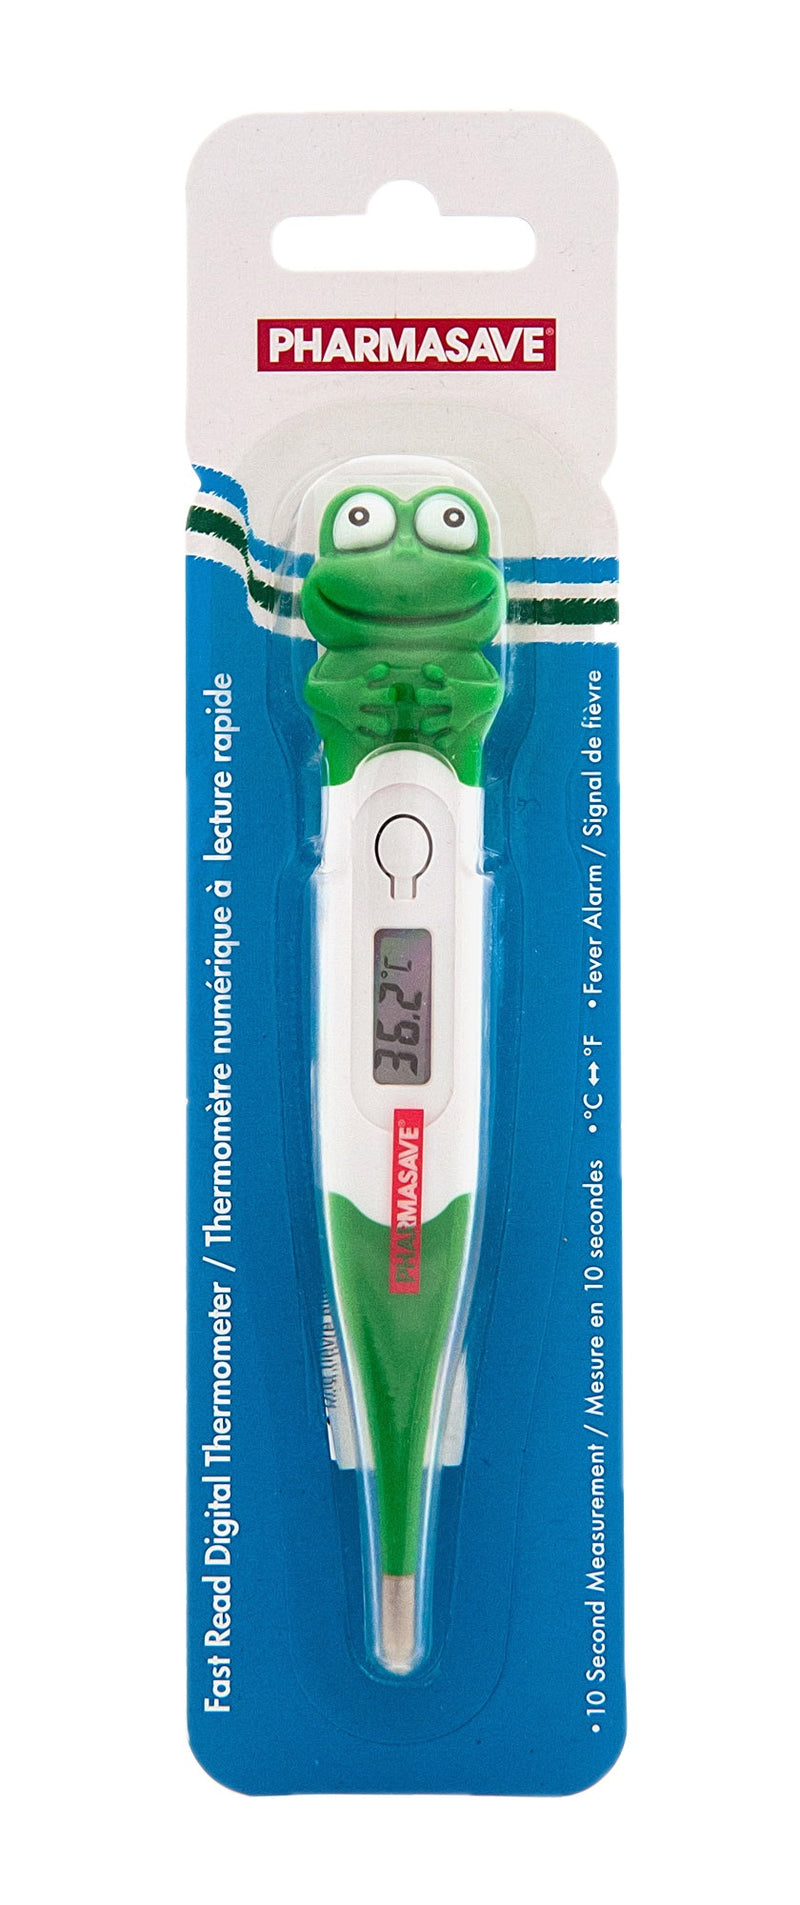 Pharmasave Fast Read Digital Thermometer 10 sec Character - Simpsons Pharmacy